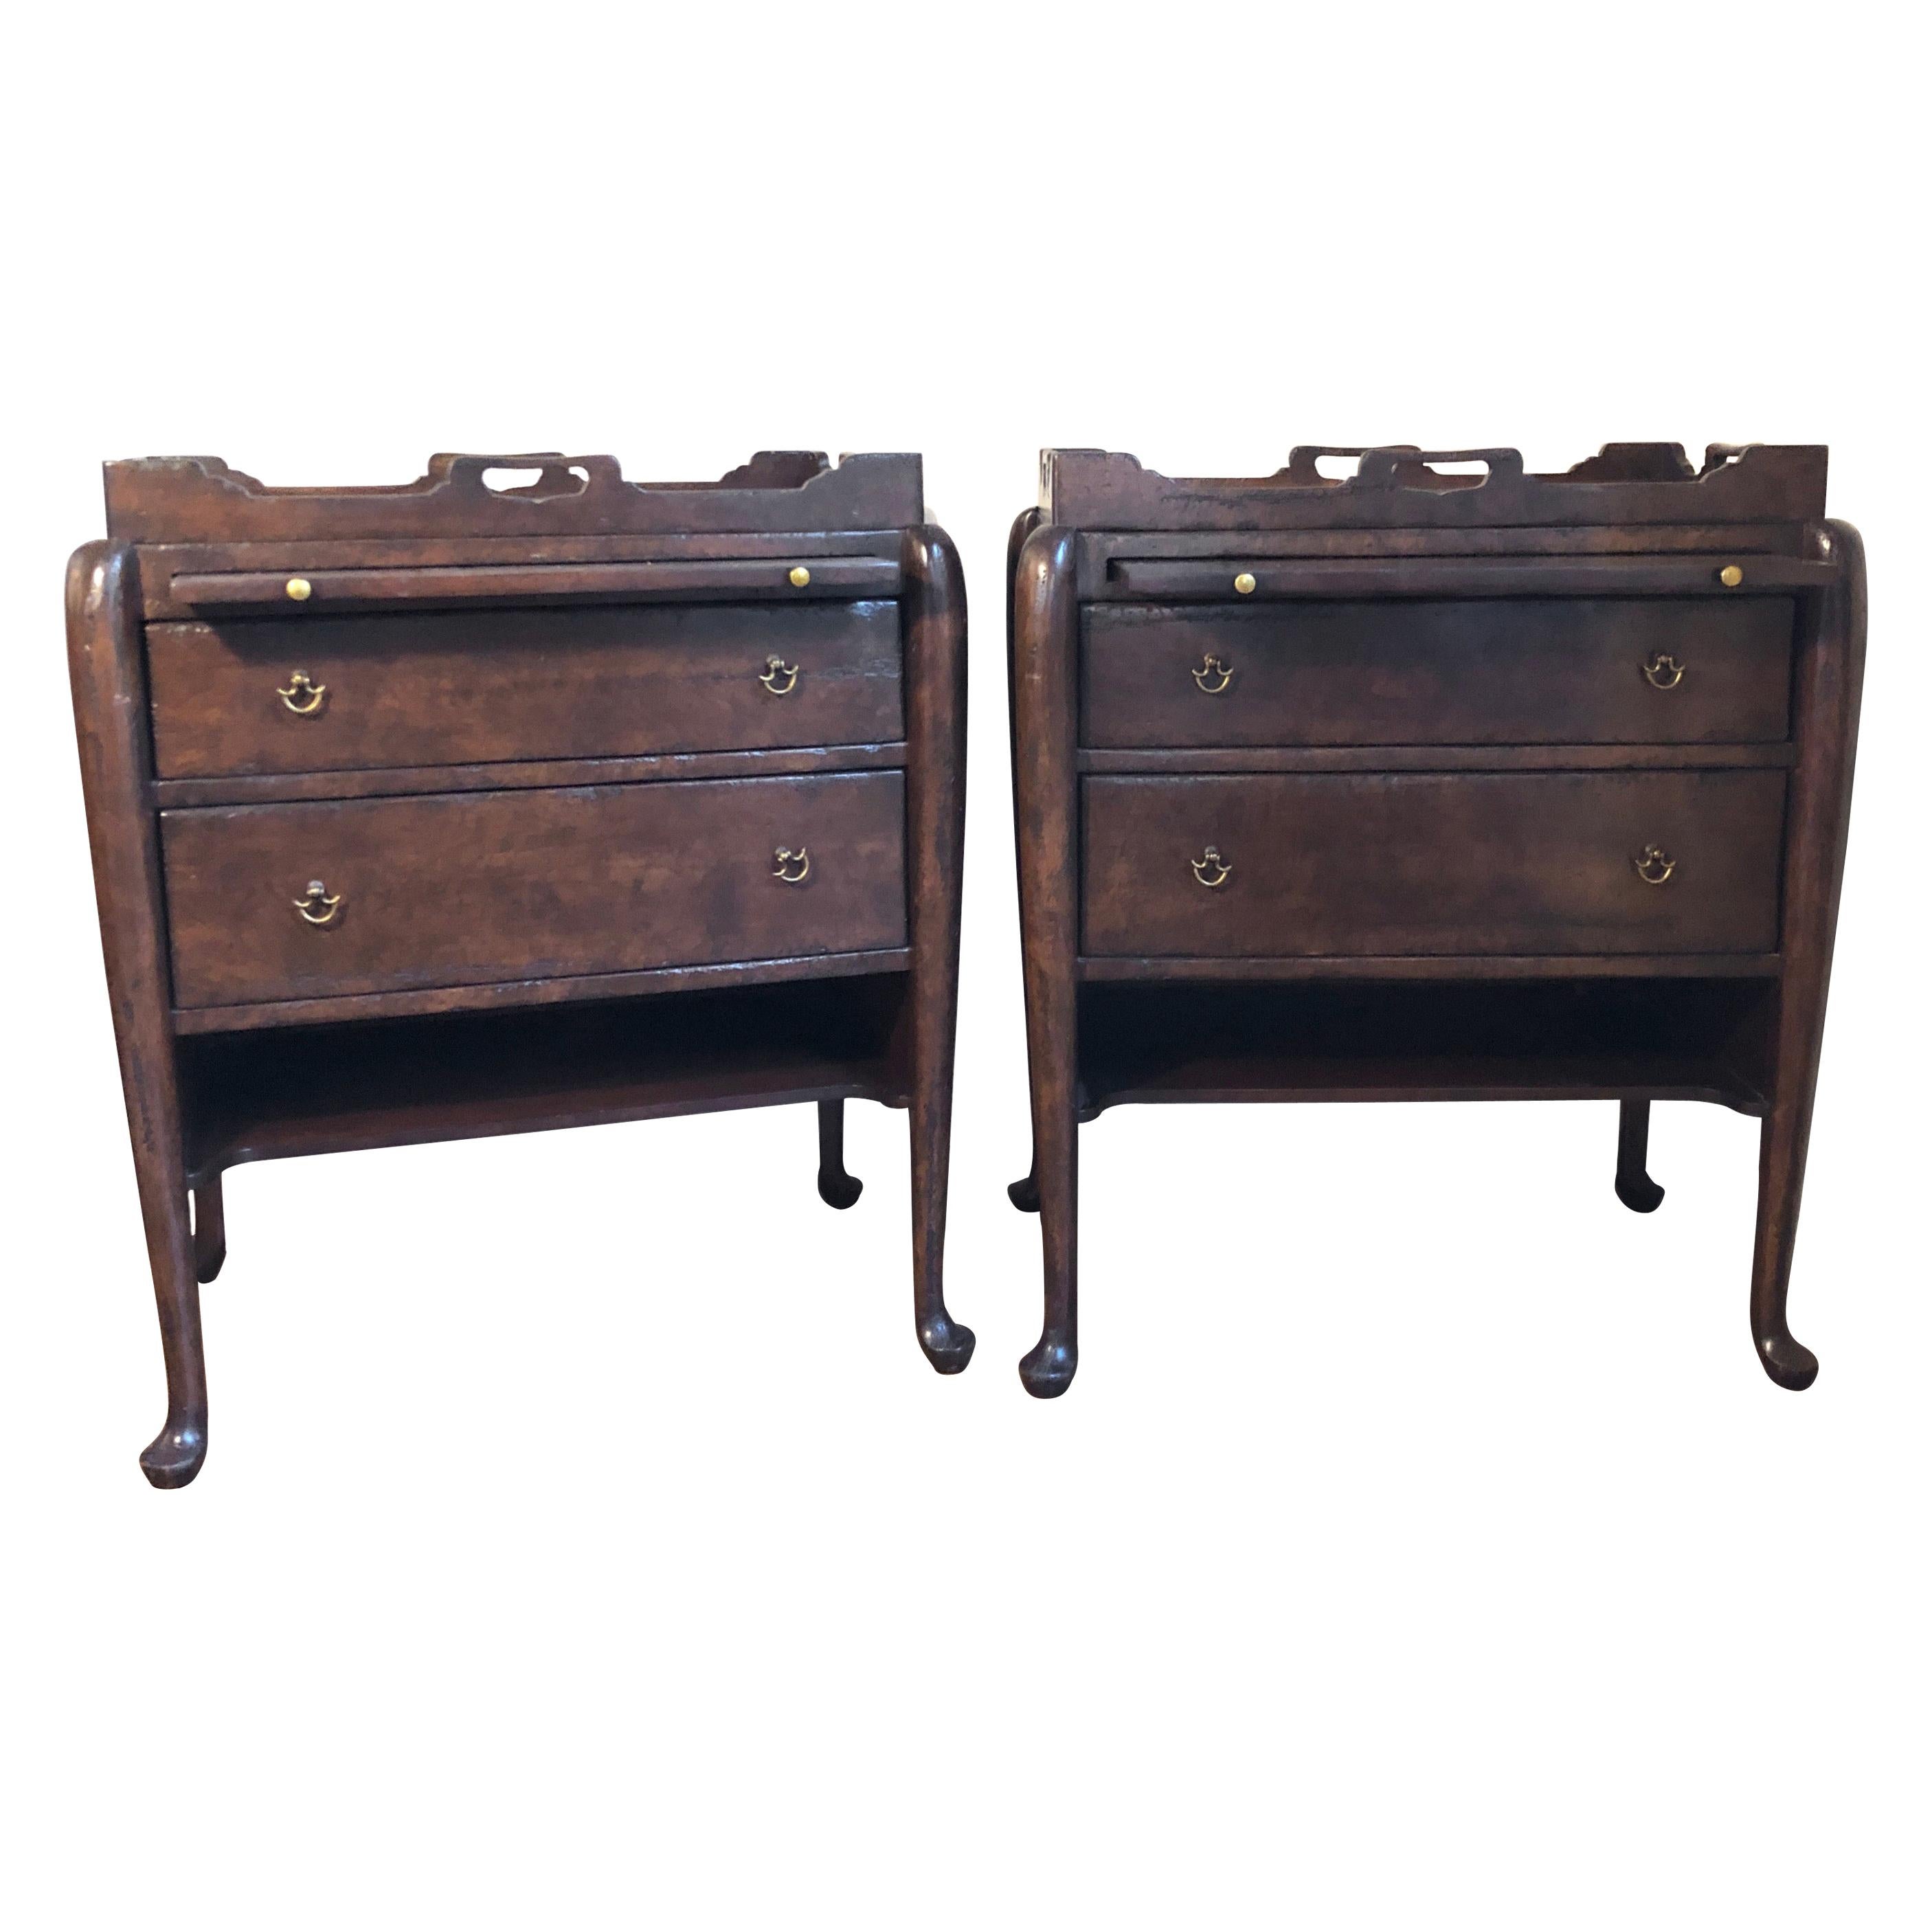 Pair of Georgian Period Walnut Tray Top Commodes/Bedside Tables